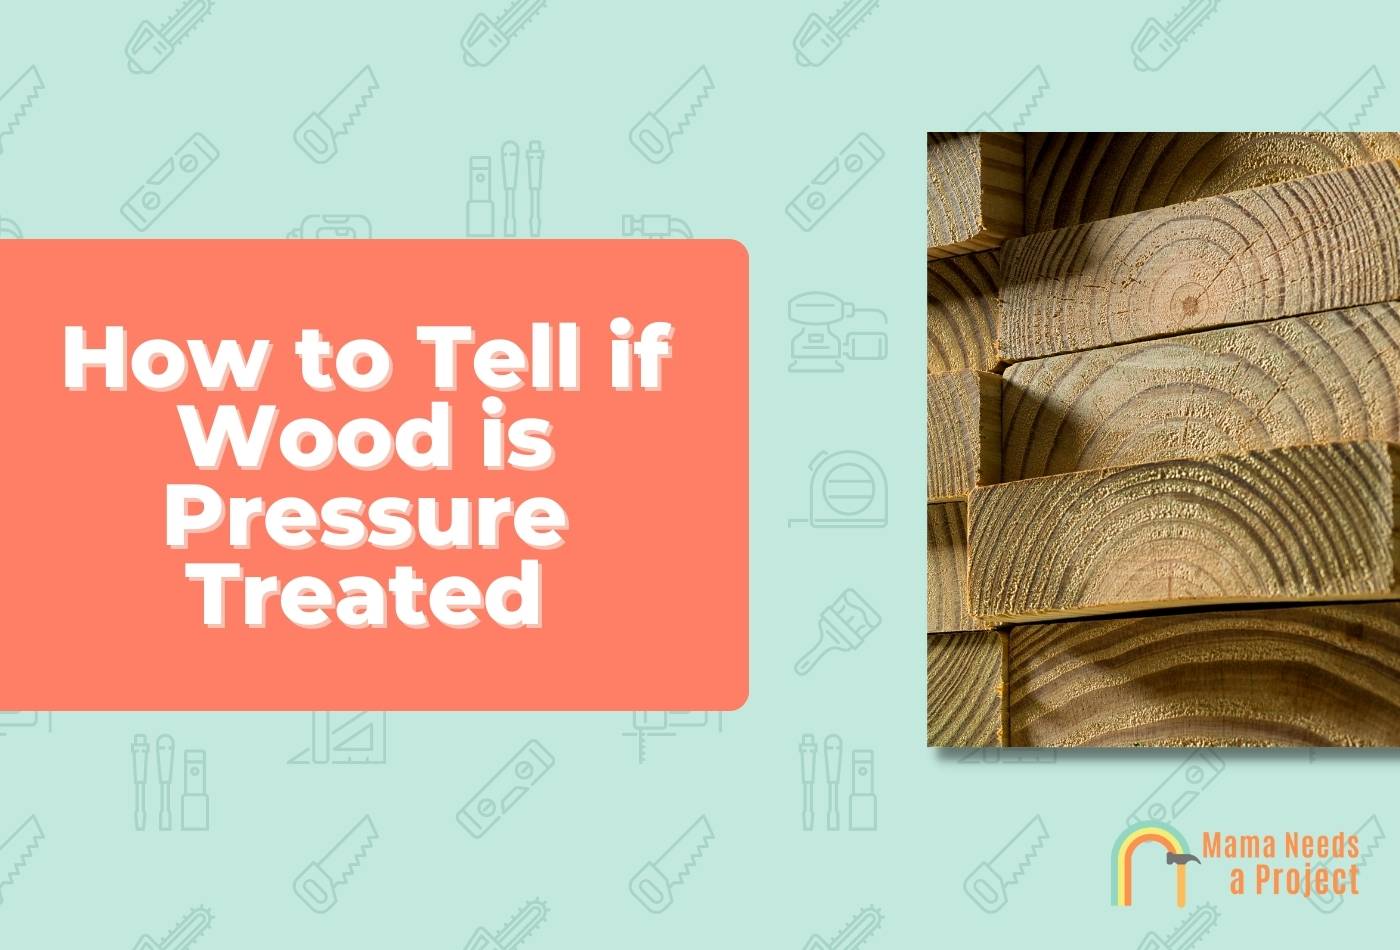 How to Tell if Wood is Pressure Treated